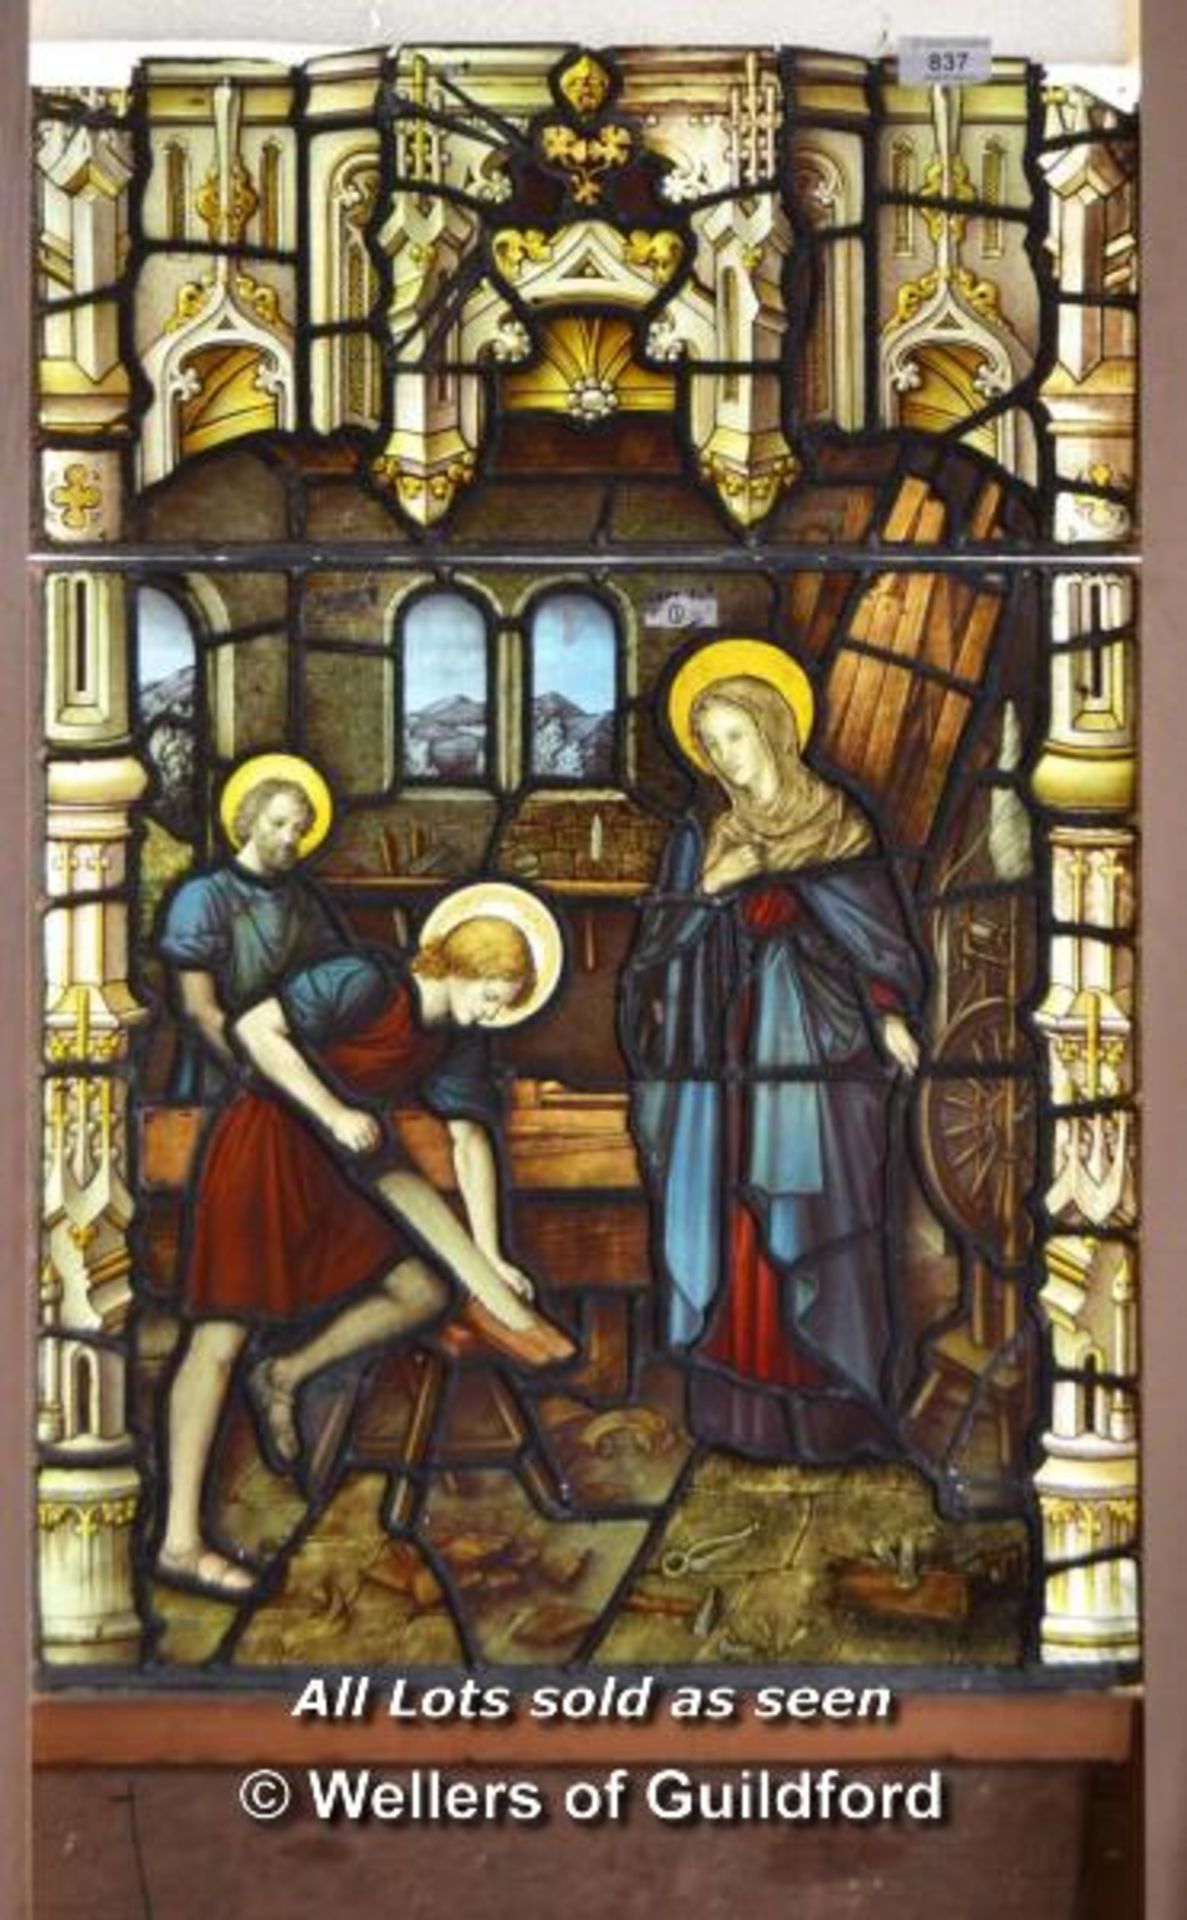 *DECORATIVE STAINED GLASS PANEL DEPICTING YOUNG JESUS CHRIST IN BETHLEHEM AS A CARPENTER FEATURING